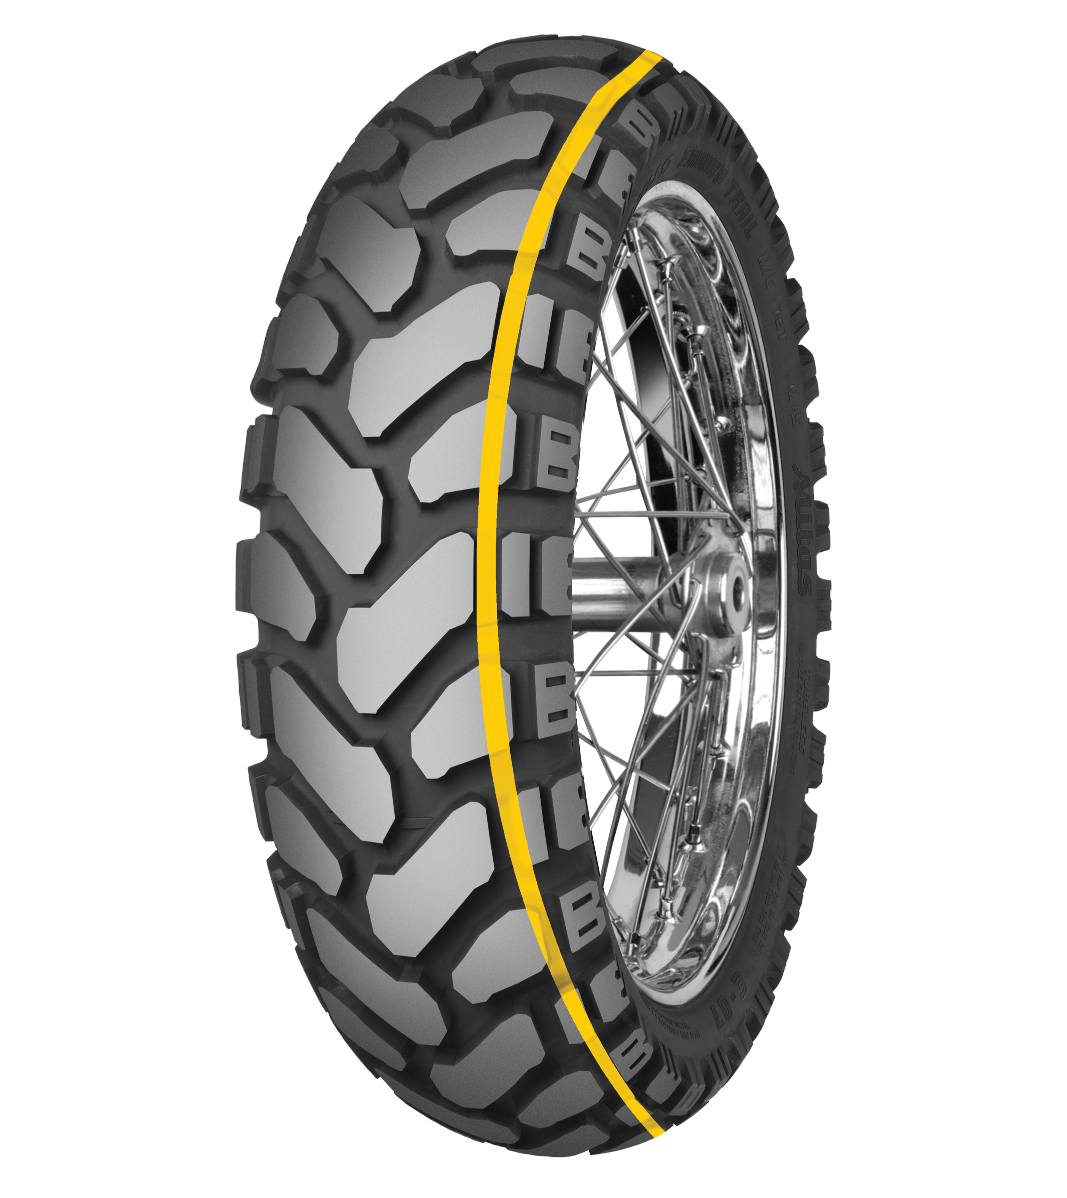 Mitas E-07+ ENDURO TRAIL 150/70B17 Trail ON Trail DAKAR 69T Yellow Tubeless Rear Tire, 224060, 150/70B17, Adventure Touring, E Series, E-07+ Enduro Trail, Rear, Trail, Trail ON, Tires - Imported and distributed in North &amp; South America by Lindeco Genuine Powersports - Premier Powersports Equipment and Accessories for Motorcycle Enthusiasts, Professional Riders and Dealers.